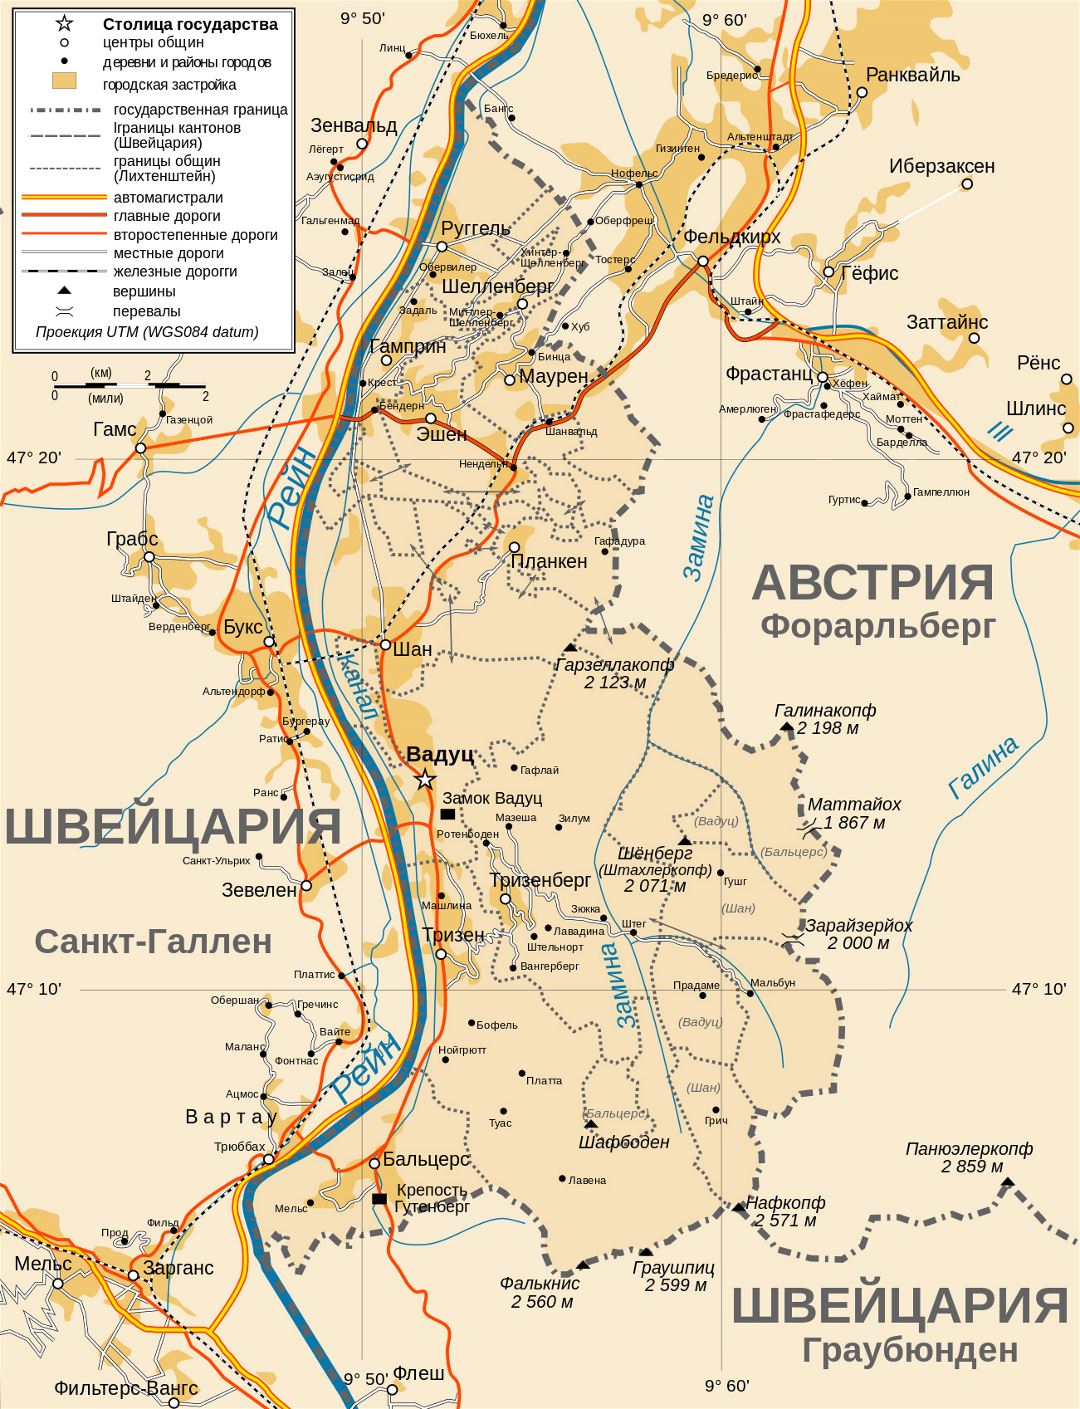 Large detailed political and administrative map of Liechtenstein with roads, cities and villages in russian